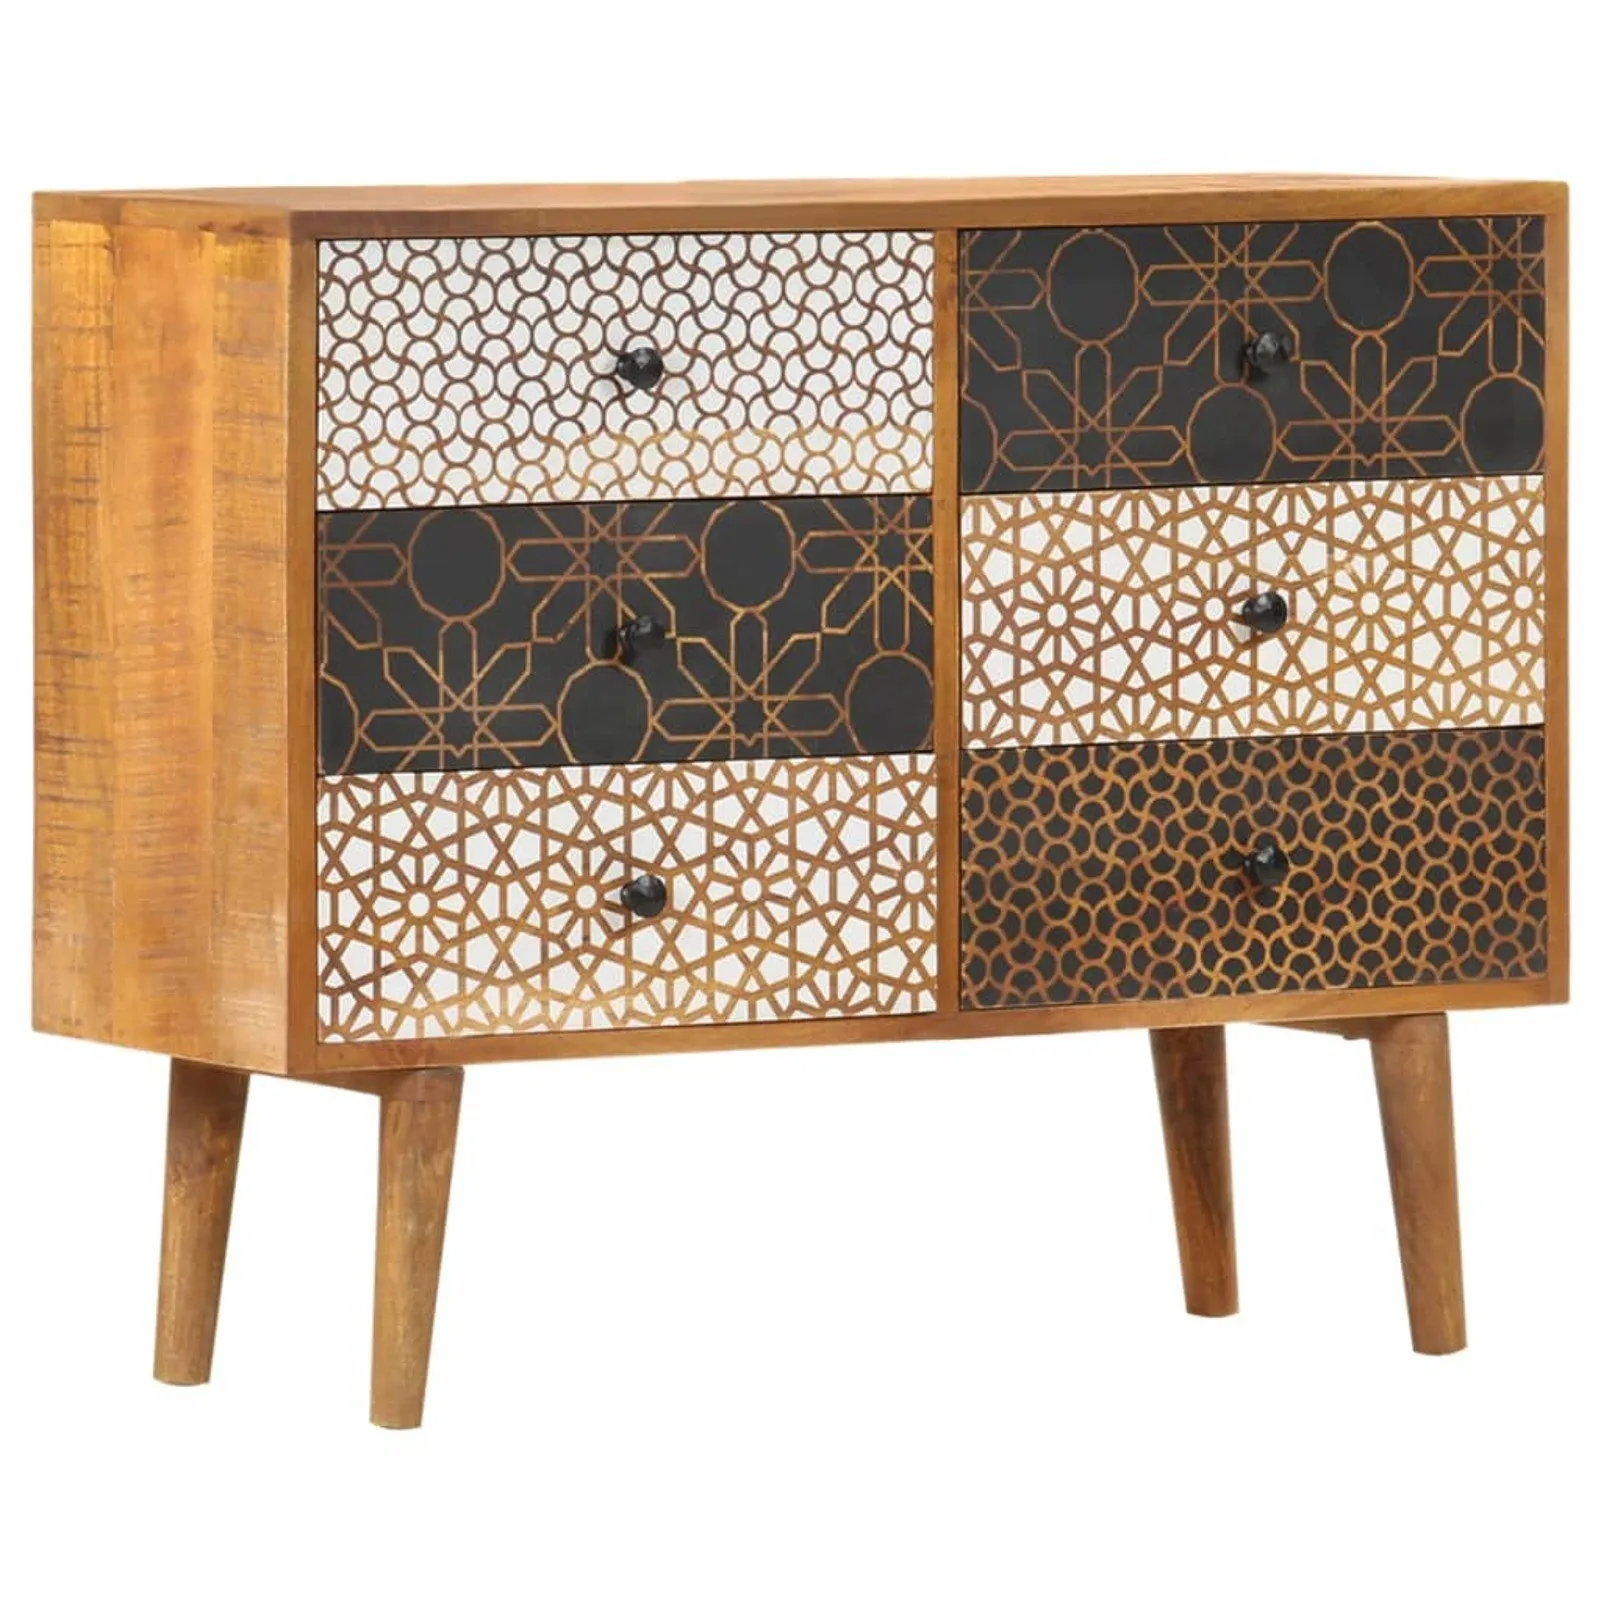 

Sideboard with Printed Pattern 35.4"x11.8"x27.6" Solid Mango Wood